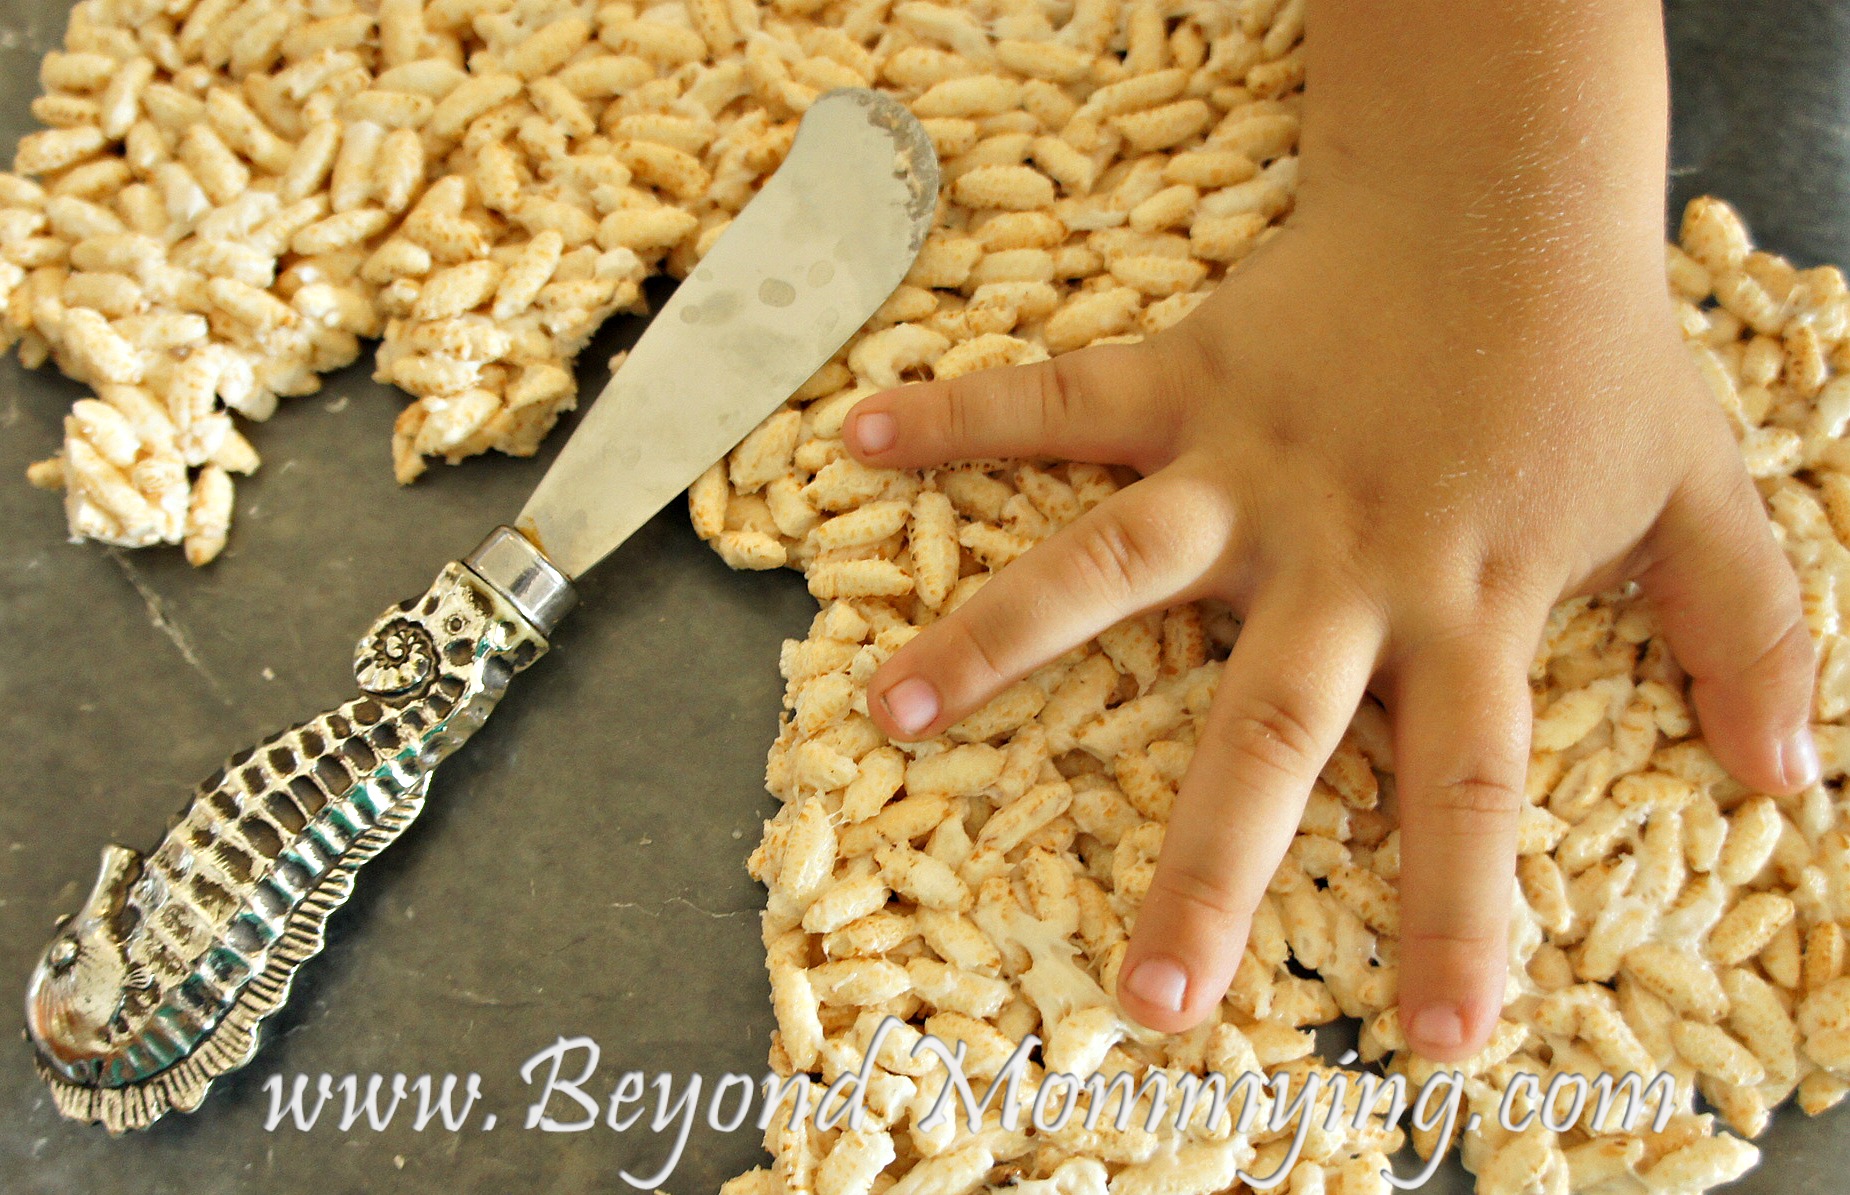 Vegan Rice Krispie Treat recipe and how to make Tiger Lilies with handprints